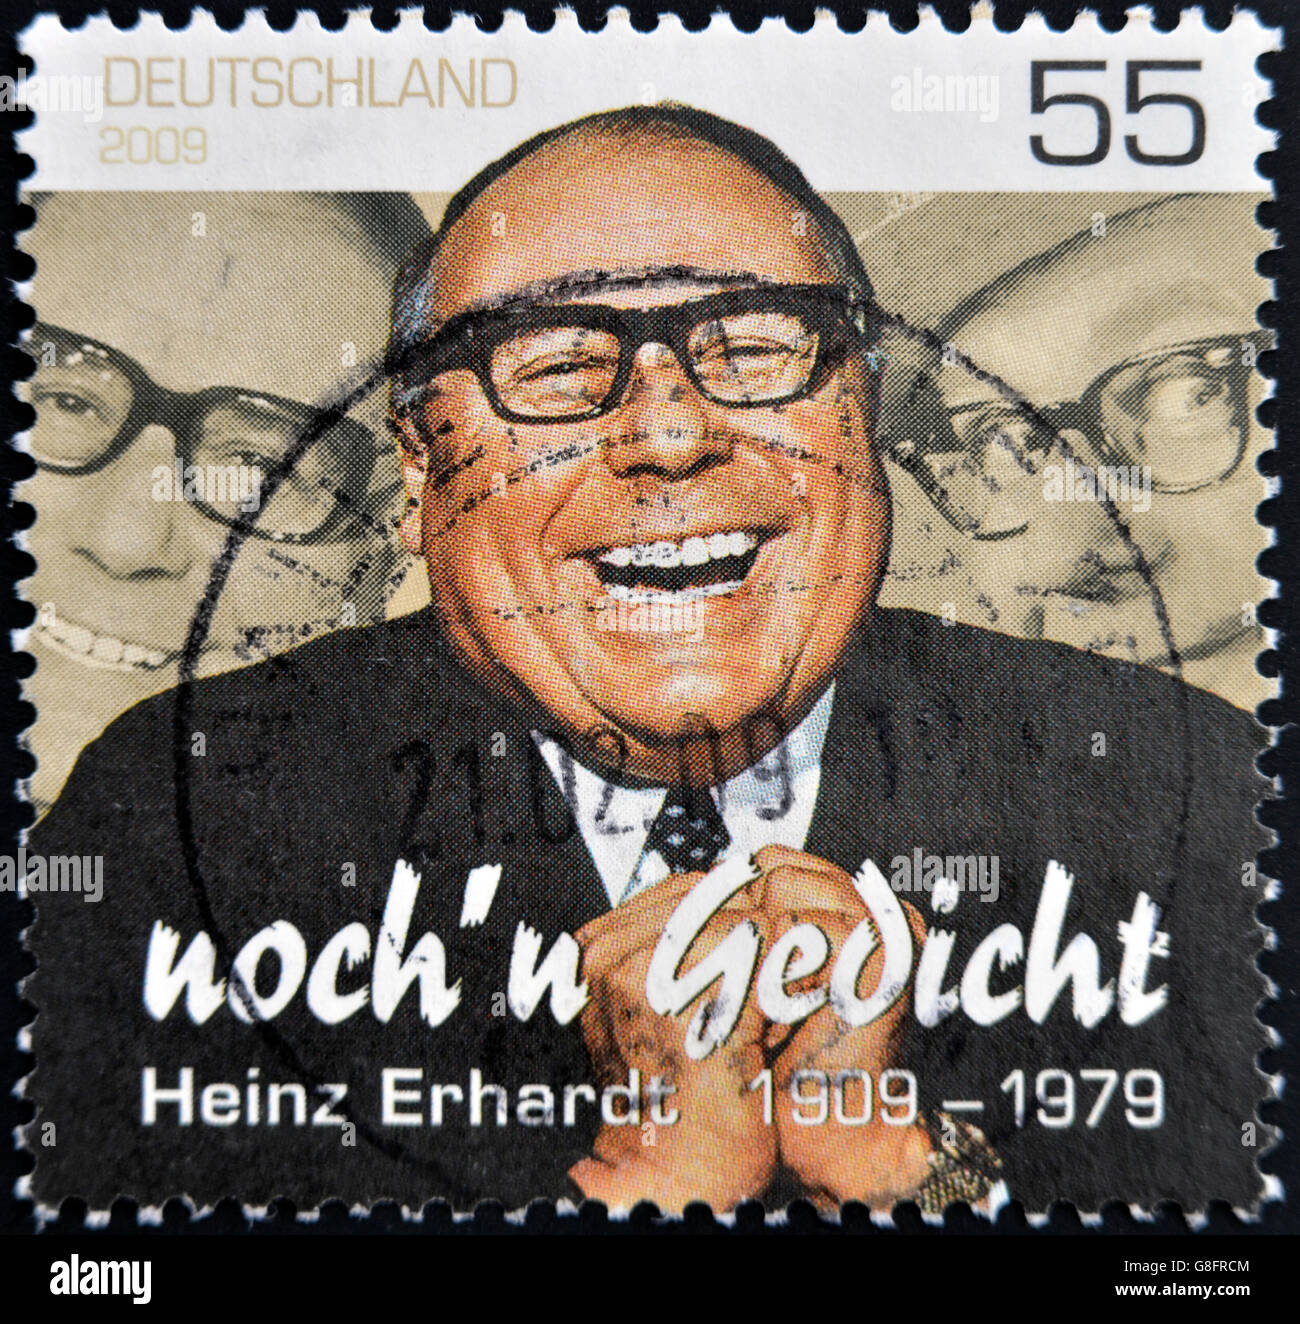 GERMANY - CIRCA 2009: A stamp printed in Germany shows Heinz Erhardt, circa 2009 Stock Photo